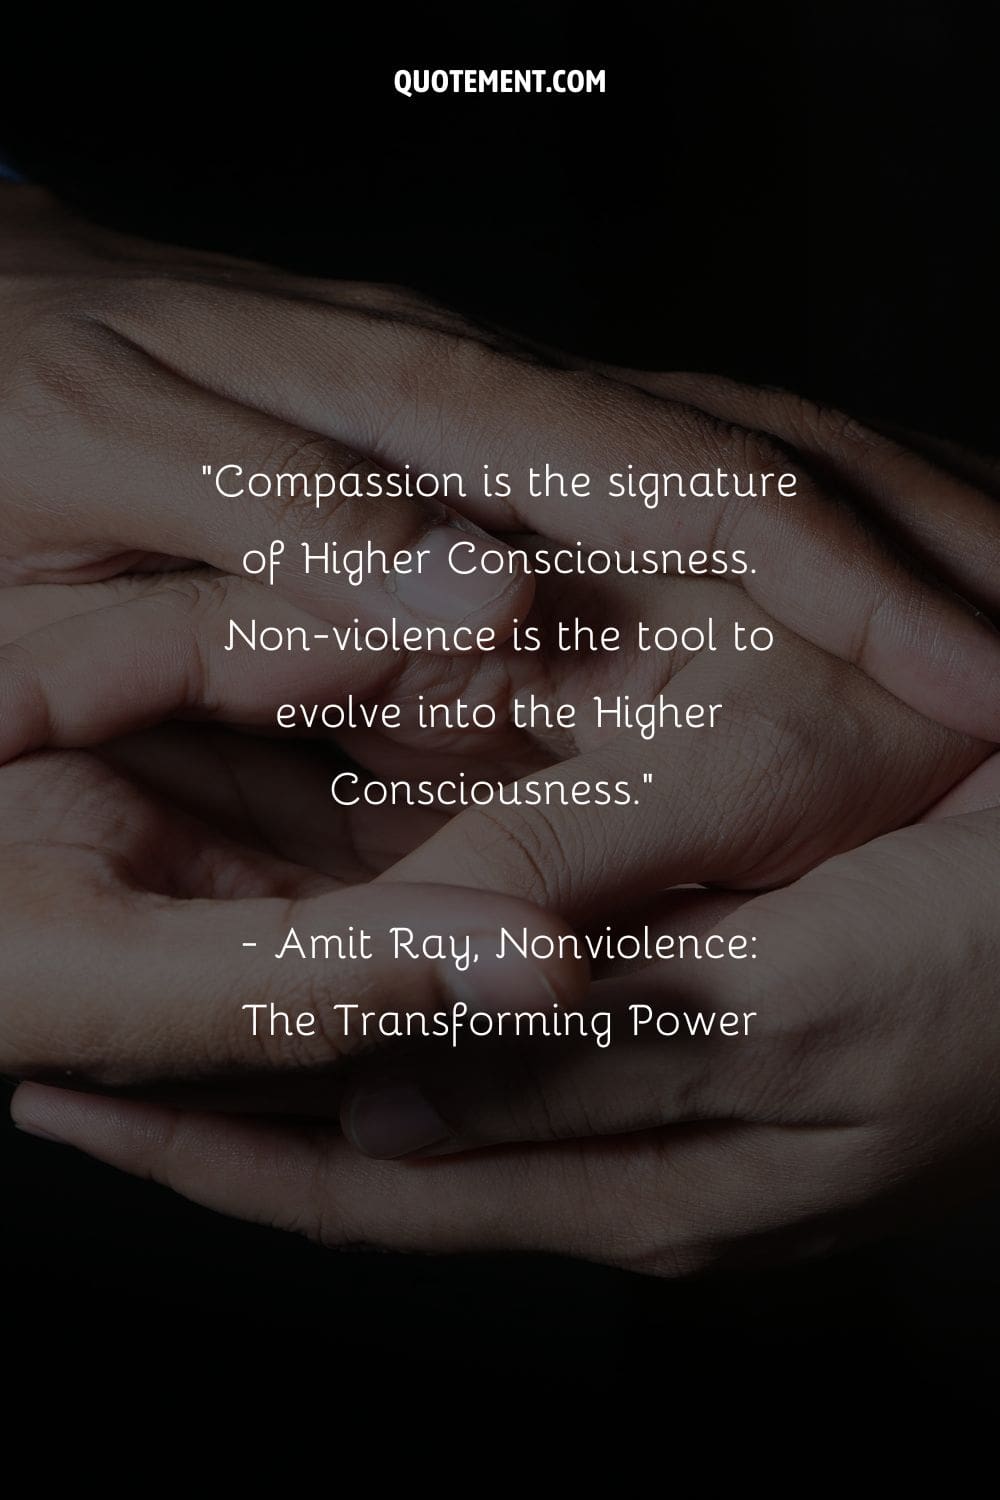 Compassion is the signature of Higher Consciousness. Non-violence is the tool to evolve into the Higher Consciousness